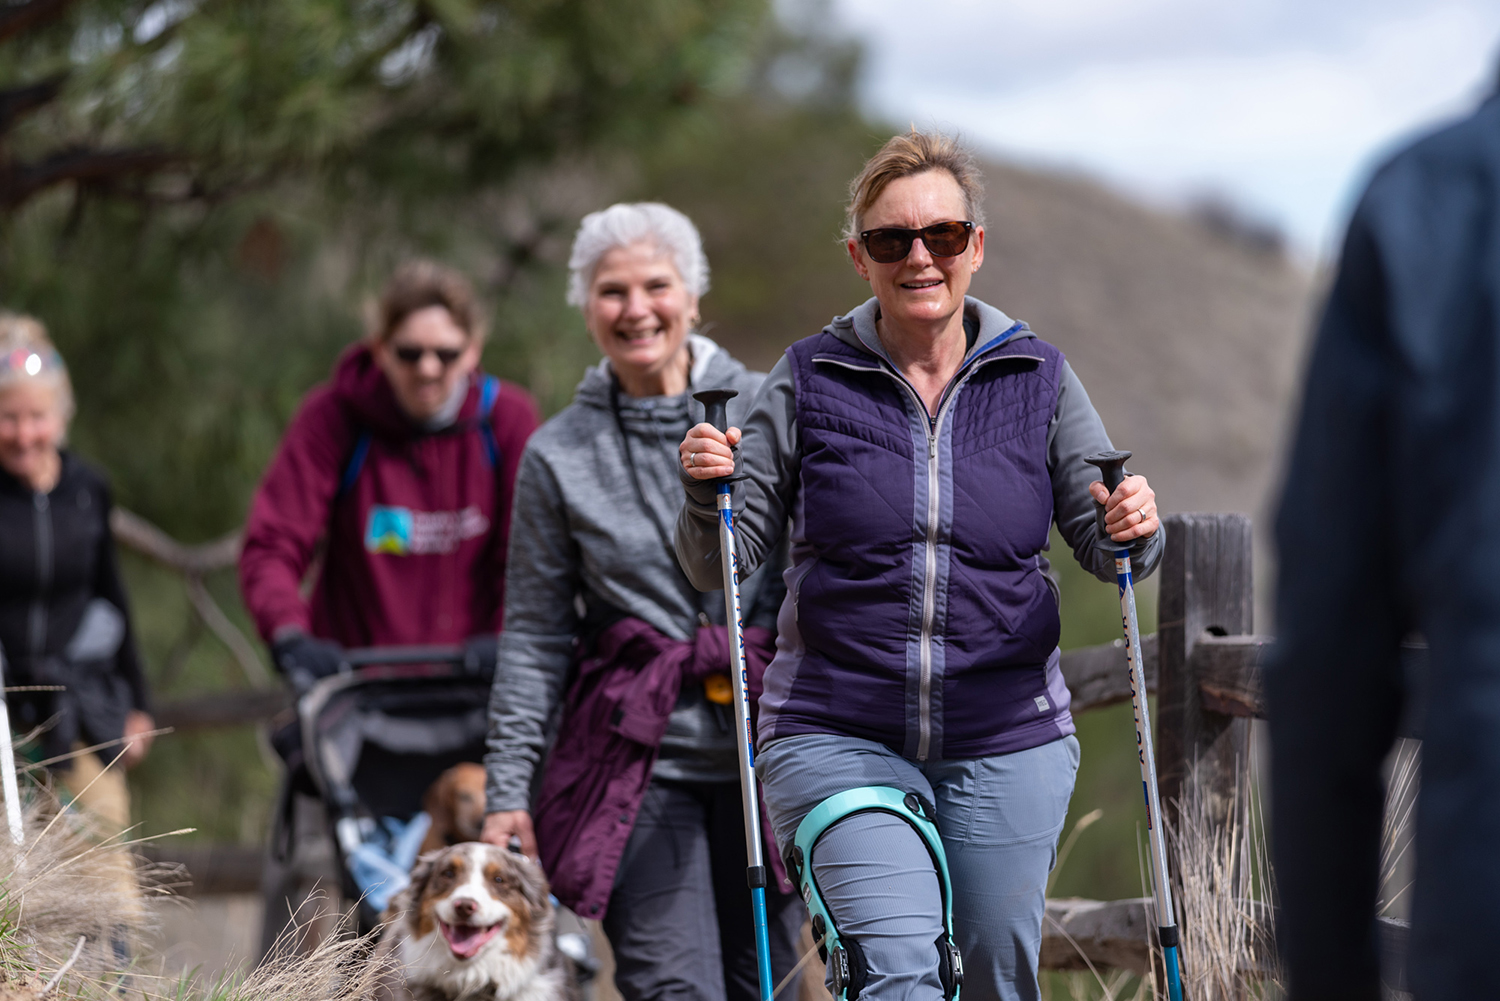 Kamloops Other older women hiking with dog and wheelchair